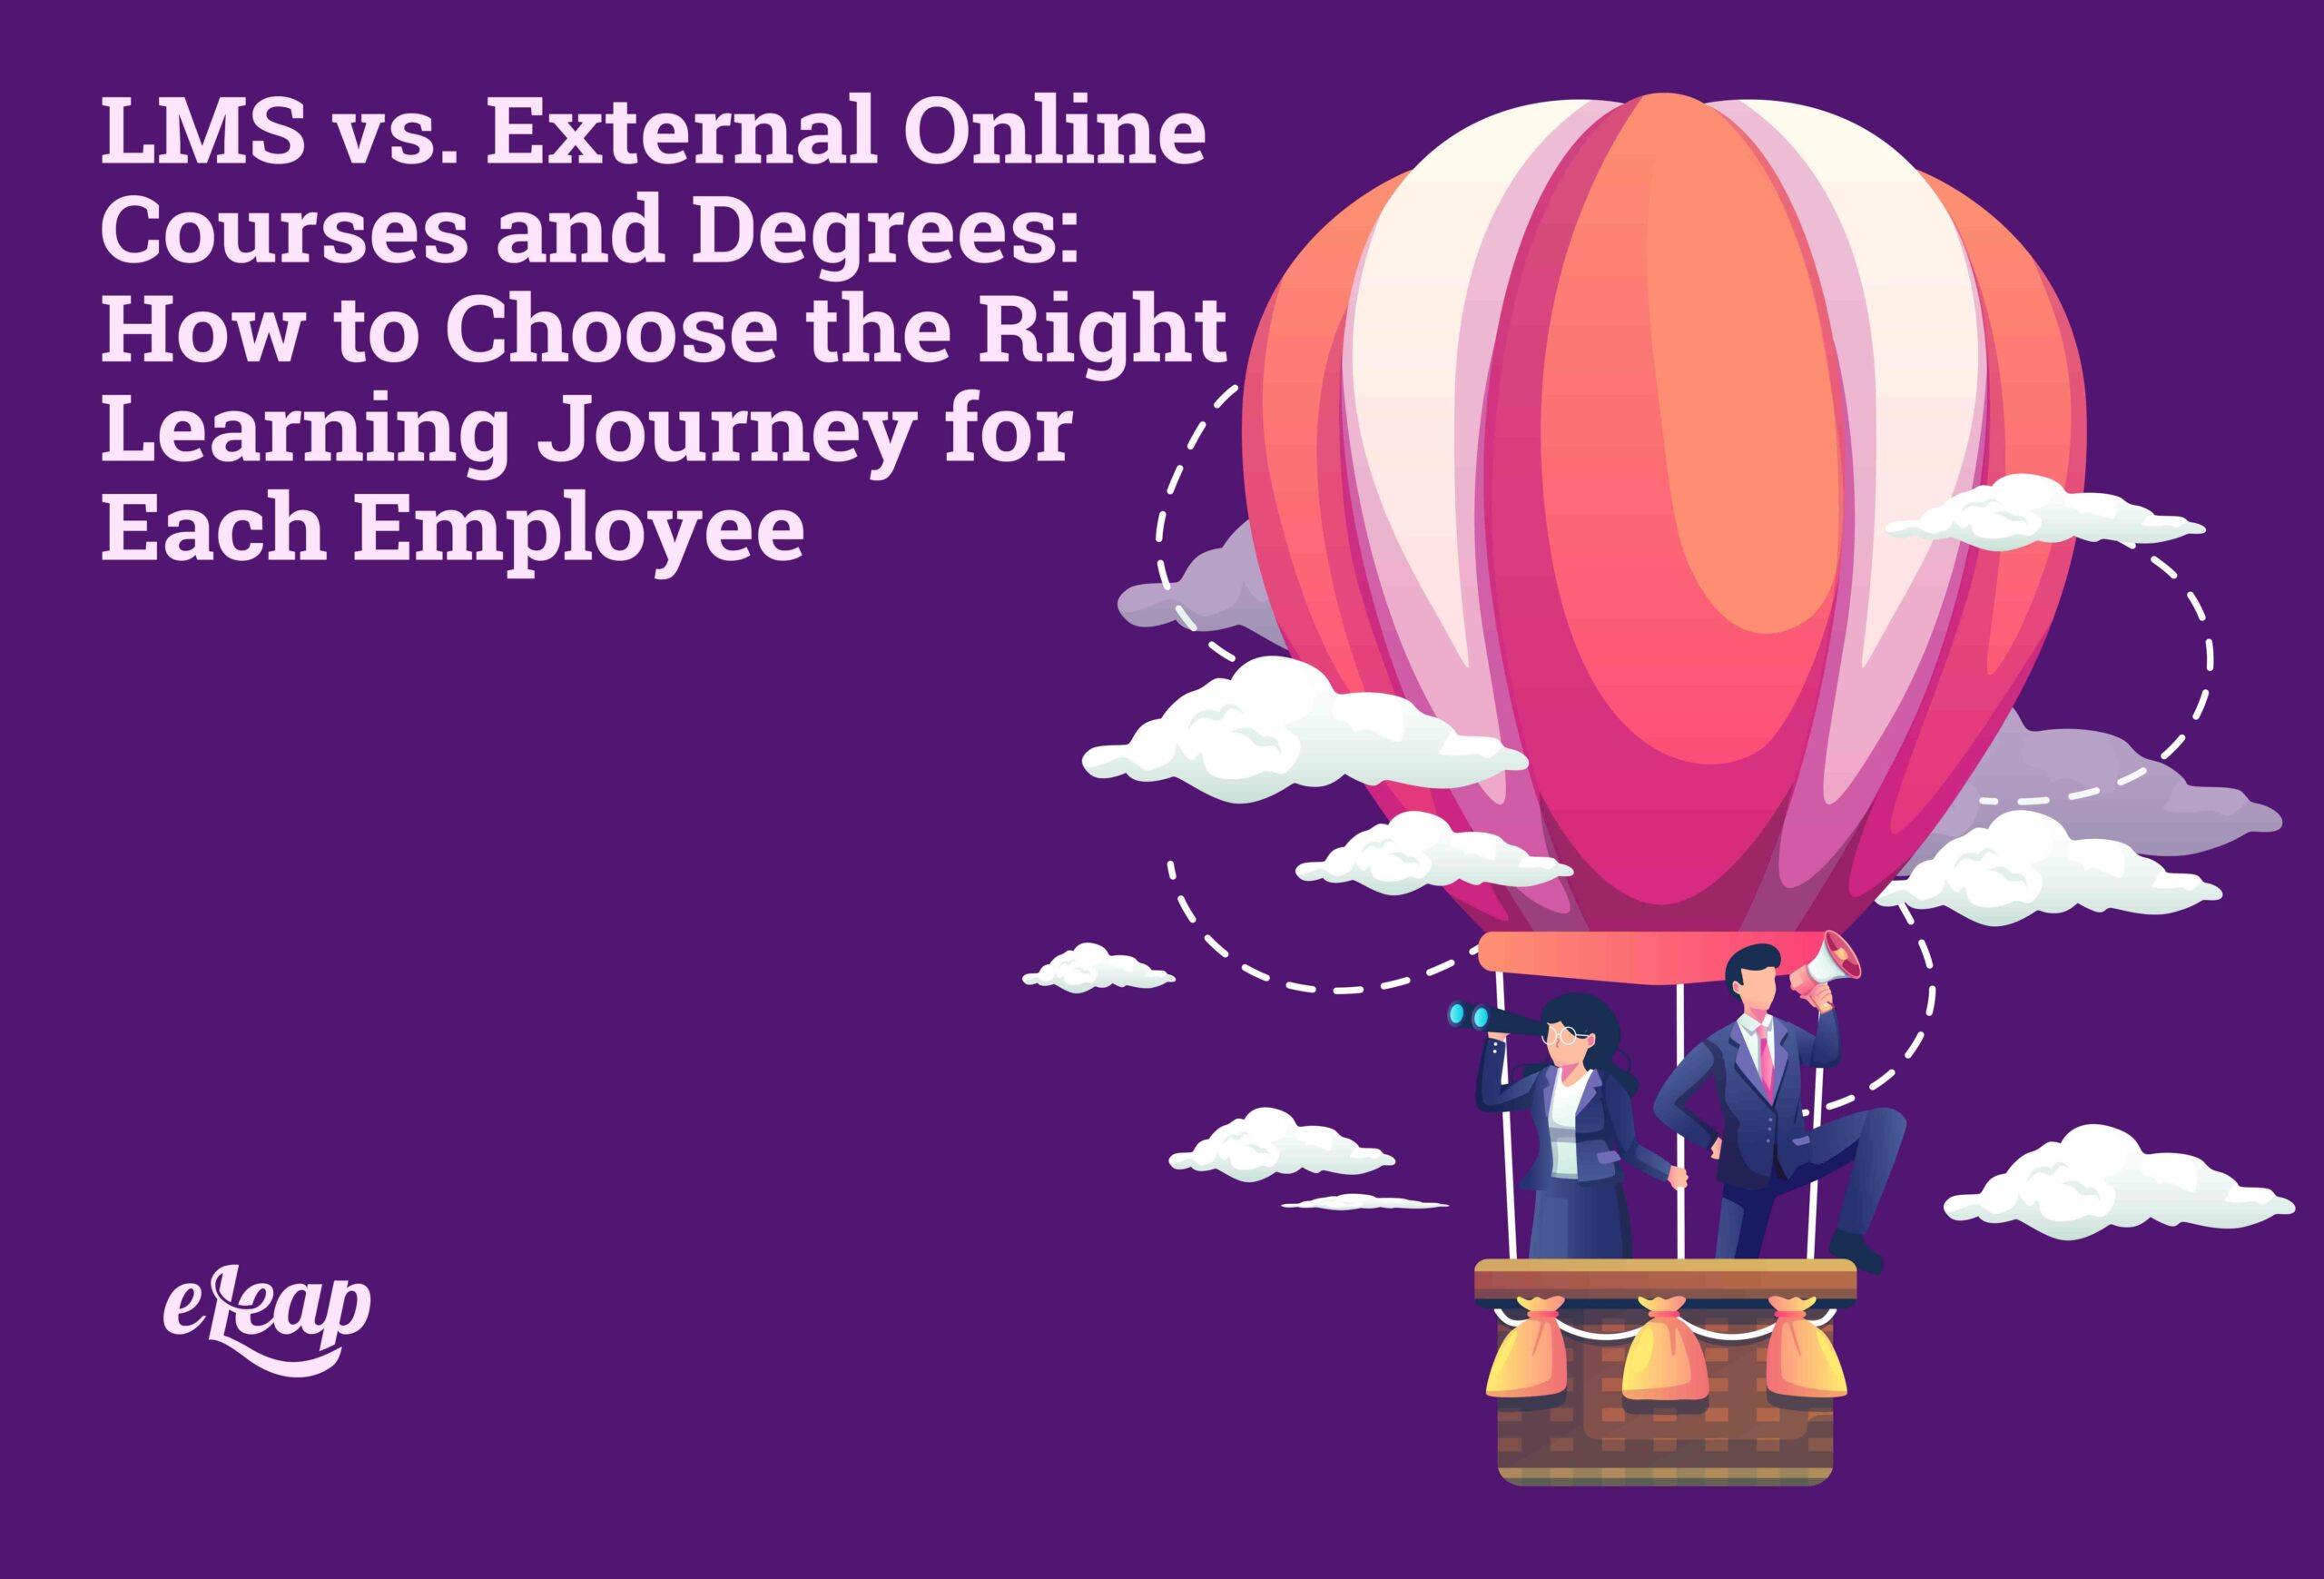 LMS vs. External Online Courses and Degrees: How to Choose the Right Learning Journey for Each Employee